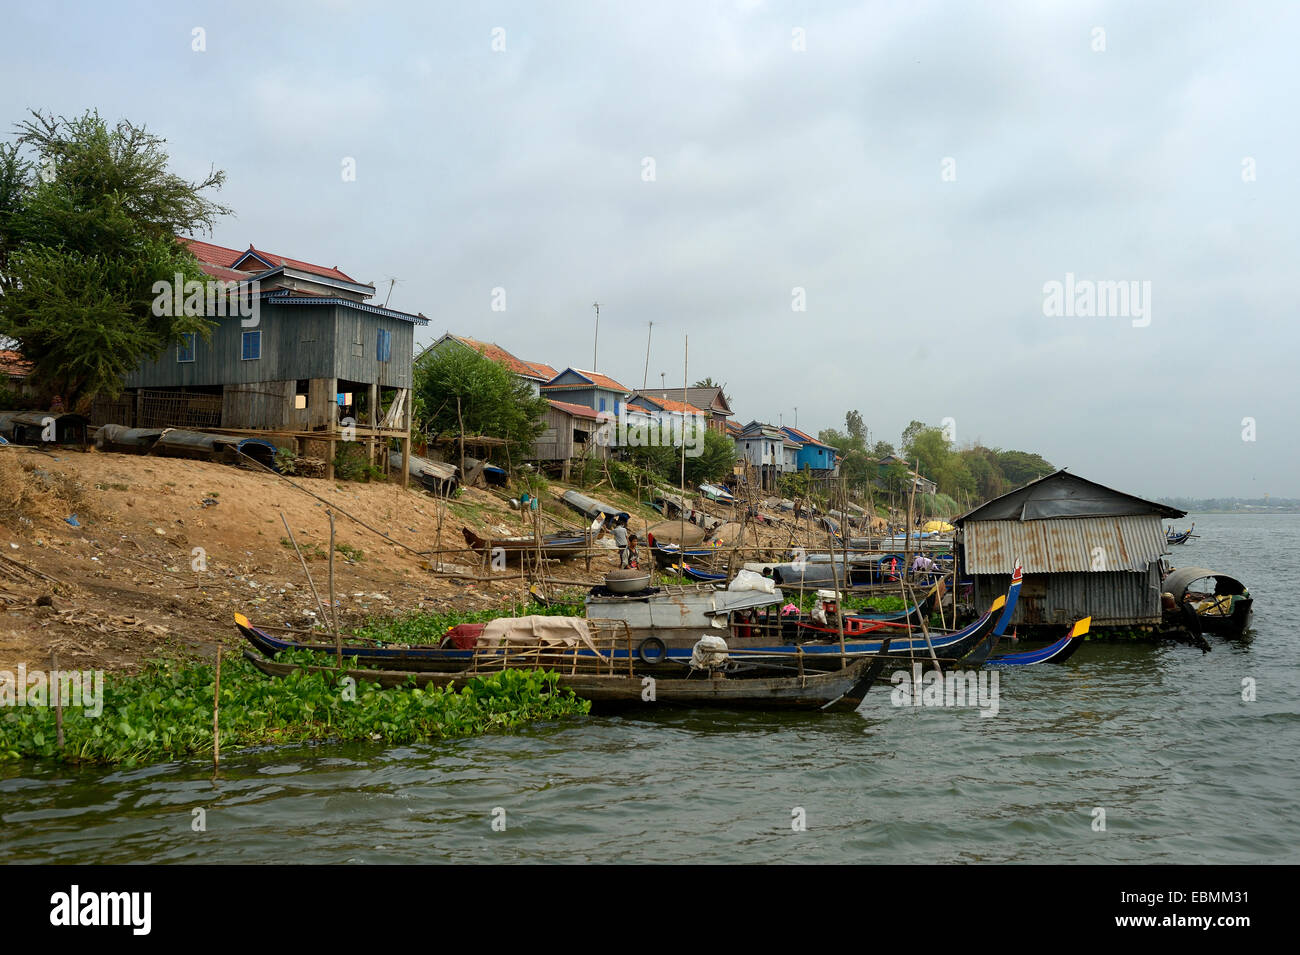 Bank of the river Prek Tnort with fishing boats and stilt houses, Prek Chrey, Kandal province, Cambodia Stock Photo